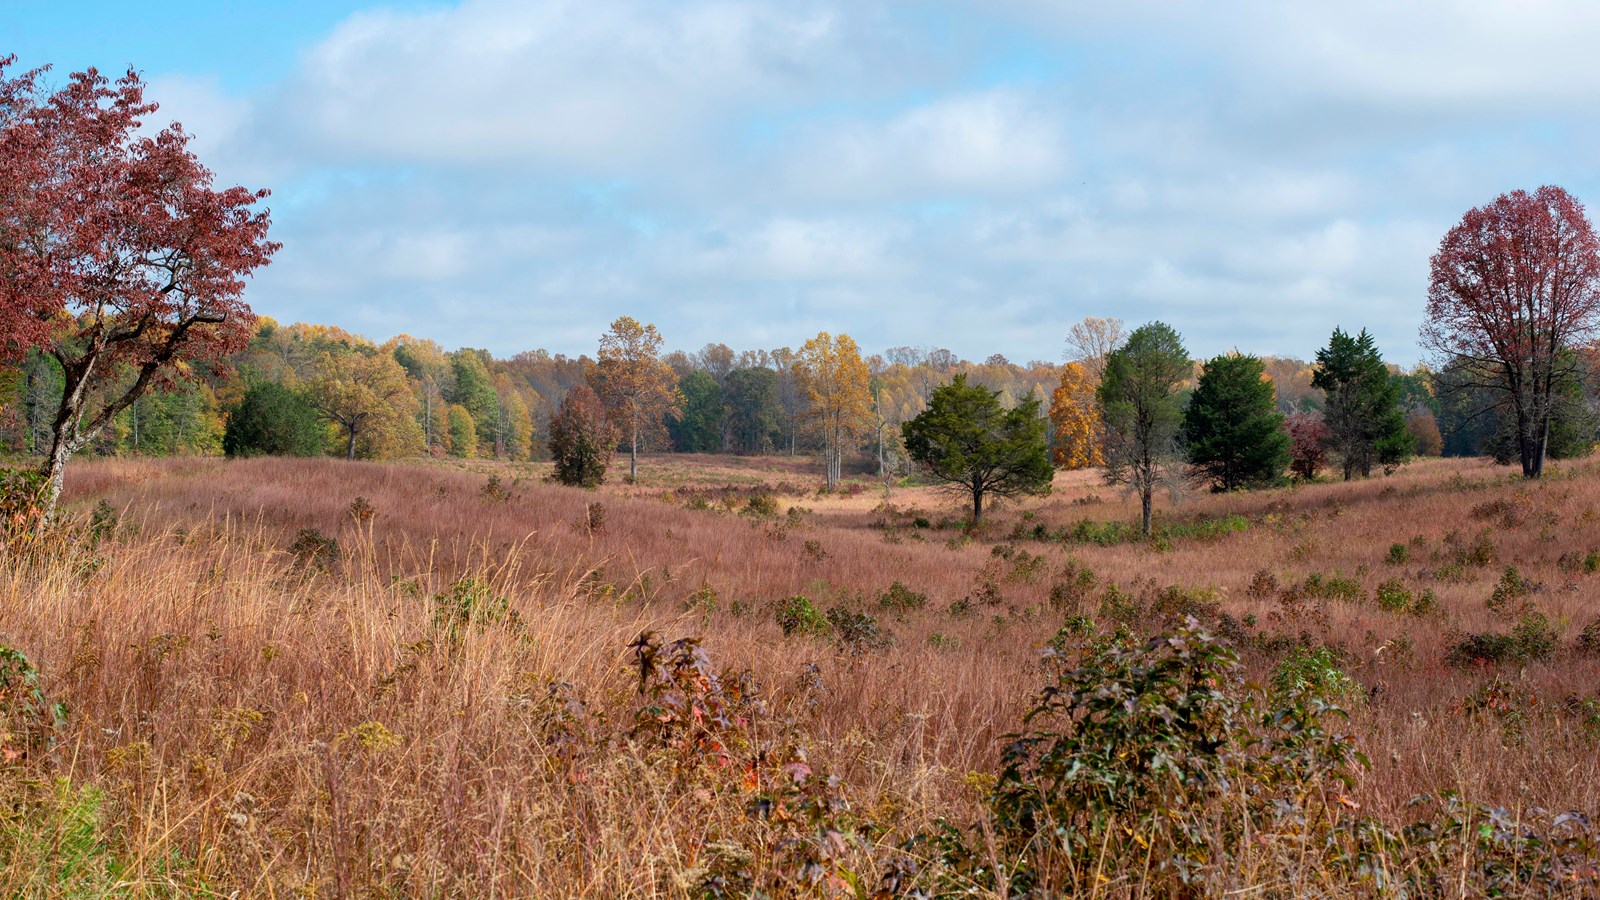 A swale through an open field with tall grasses and woods in the distance.